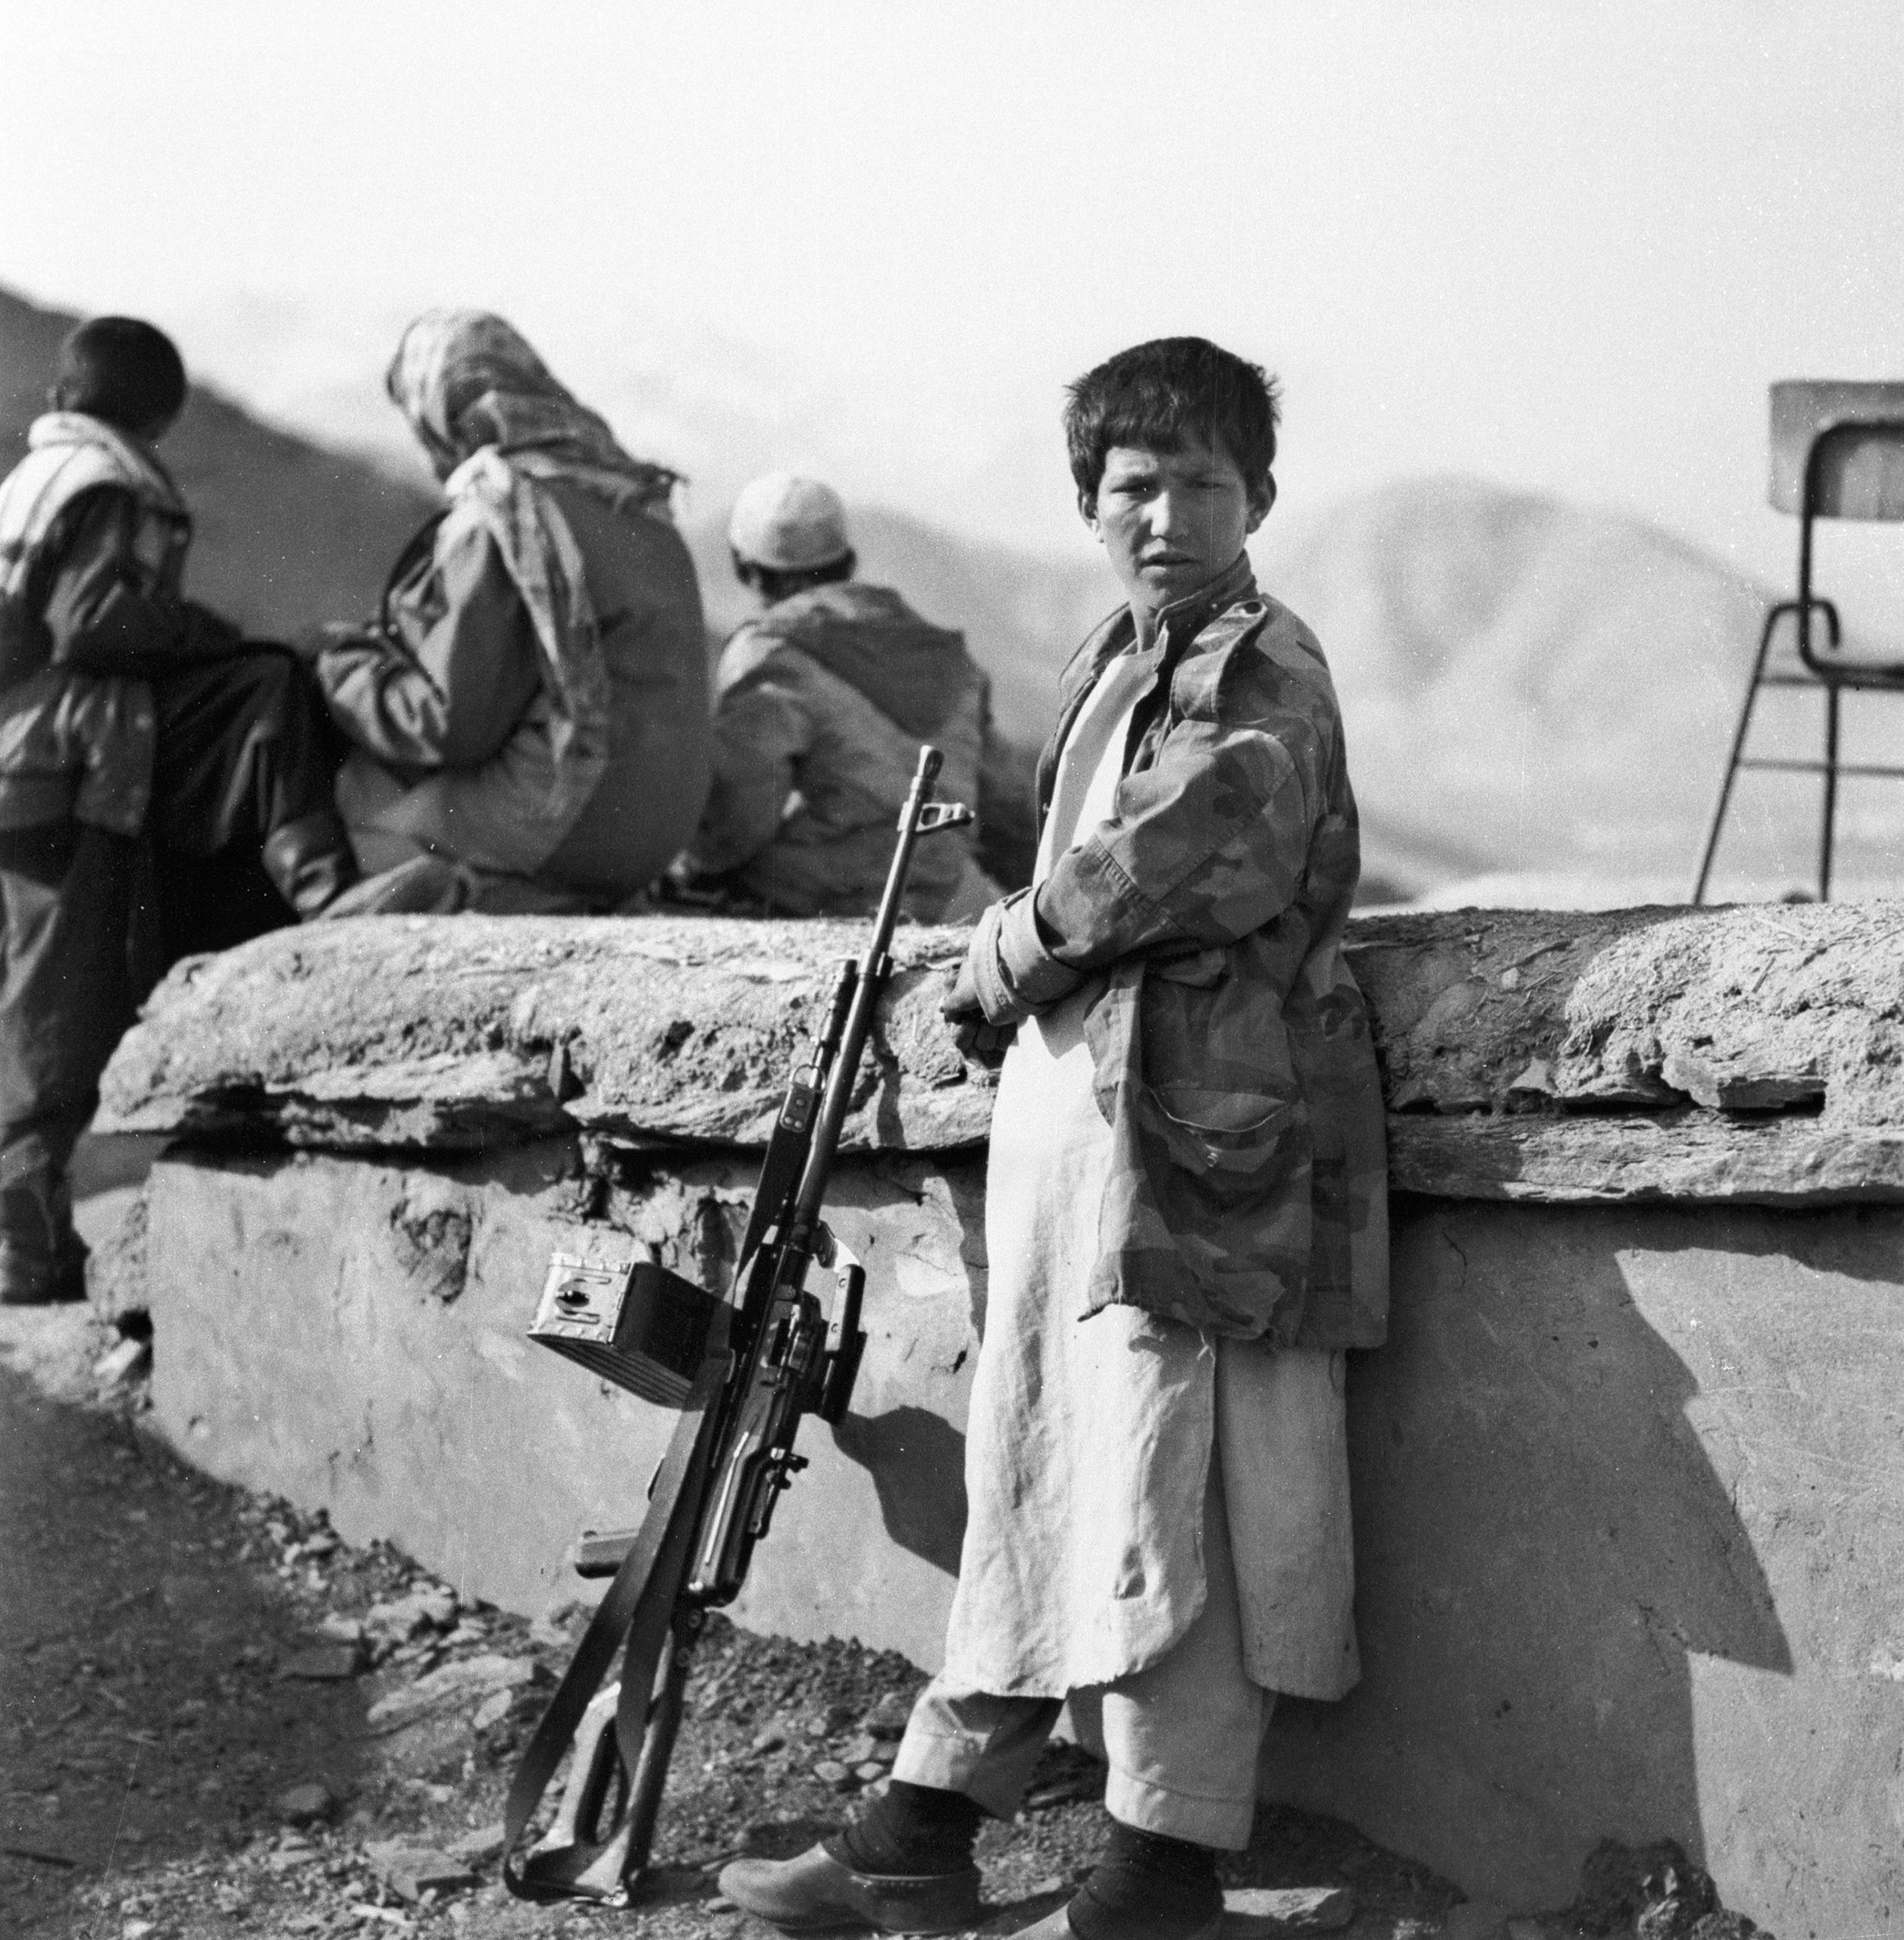 A black and white photo of a child soldier in Afghanistan